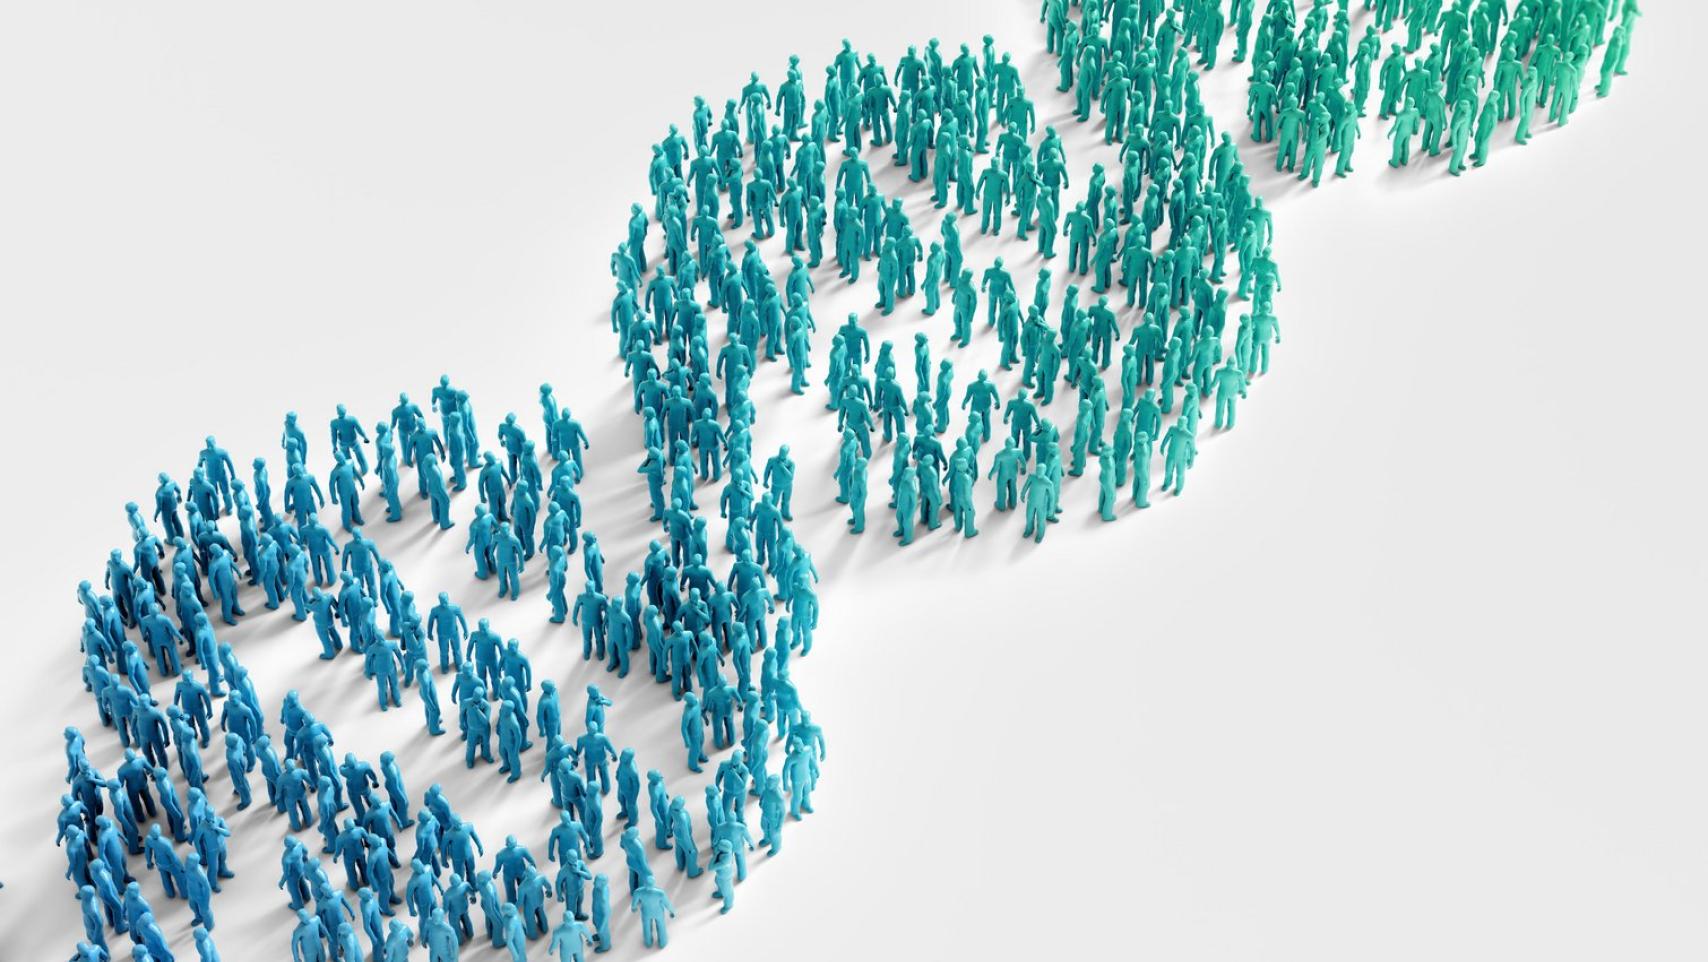 3D Graphic of crowd of people arranged in a double helix pattern